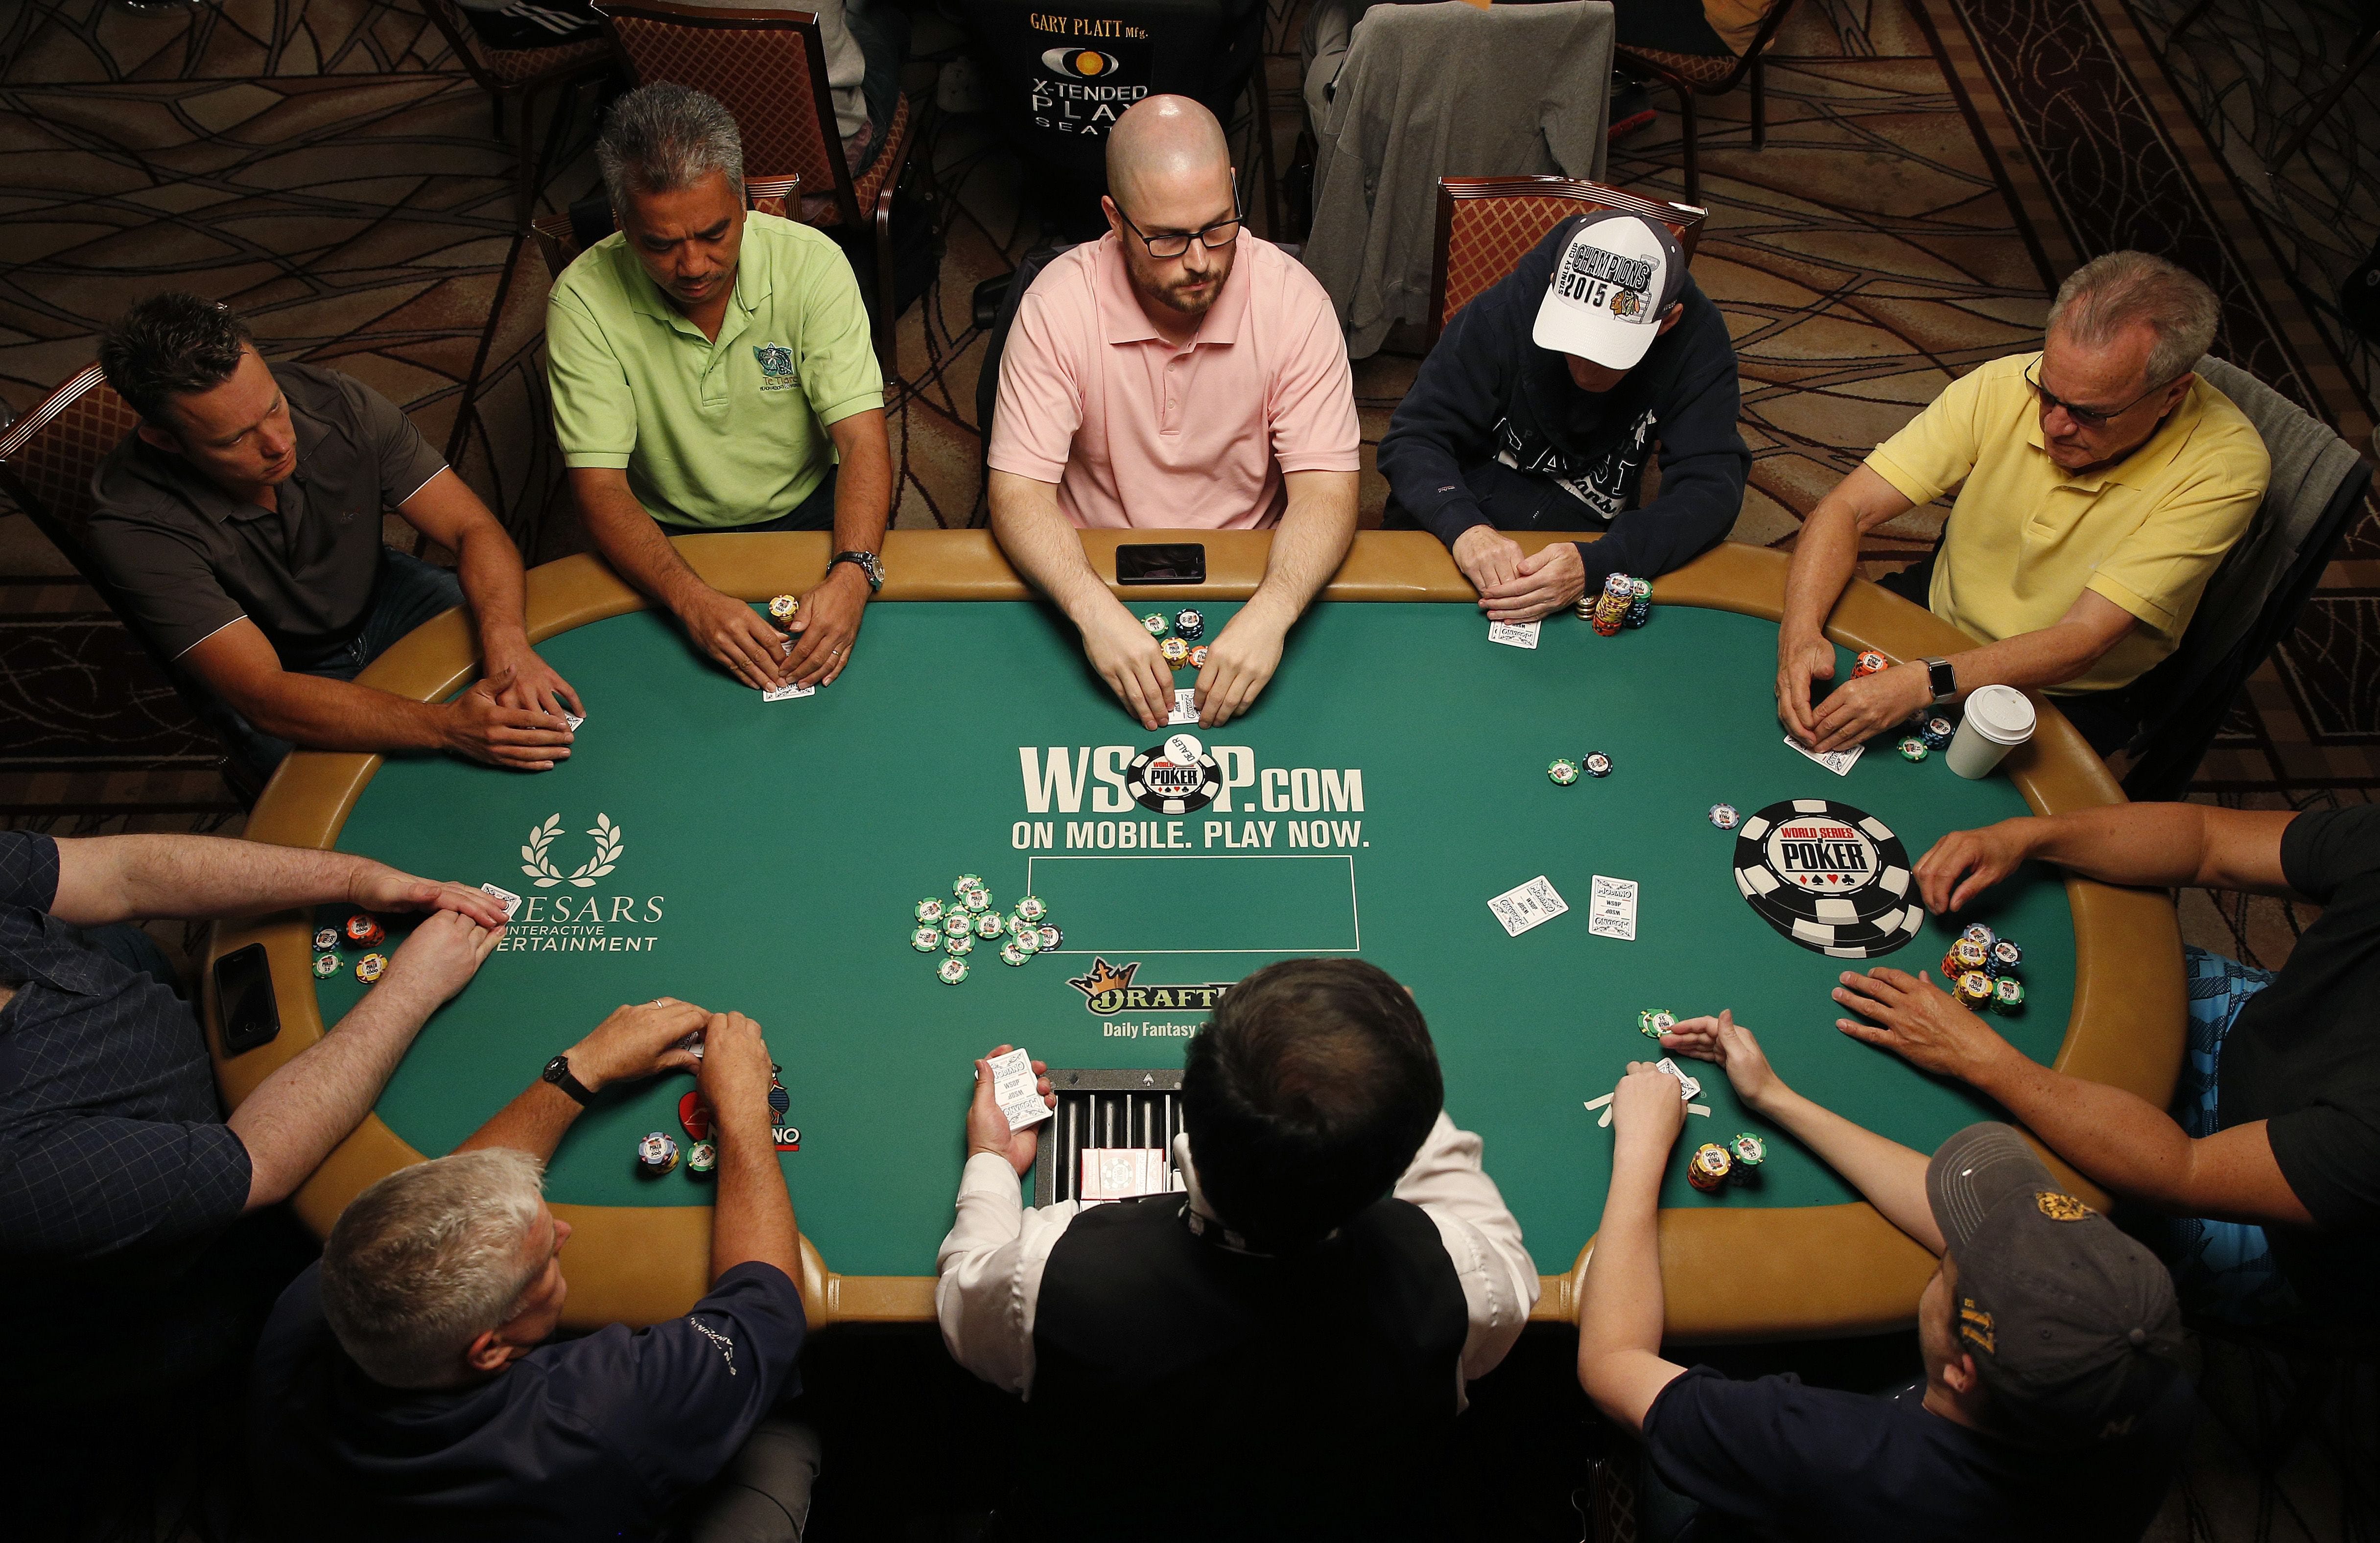 At 50, the World Series of Poker has